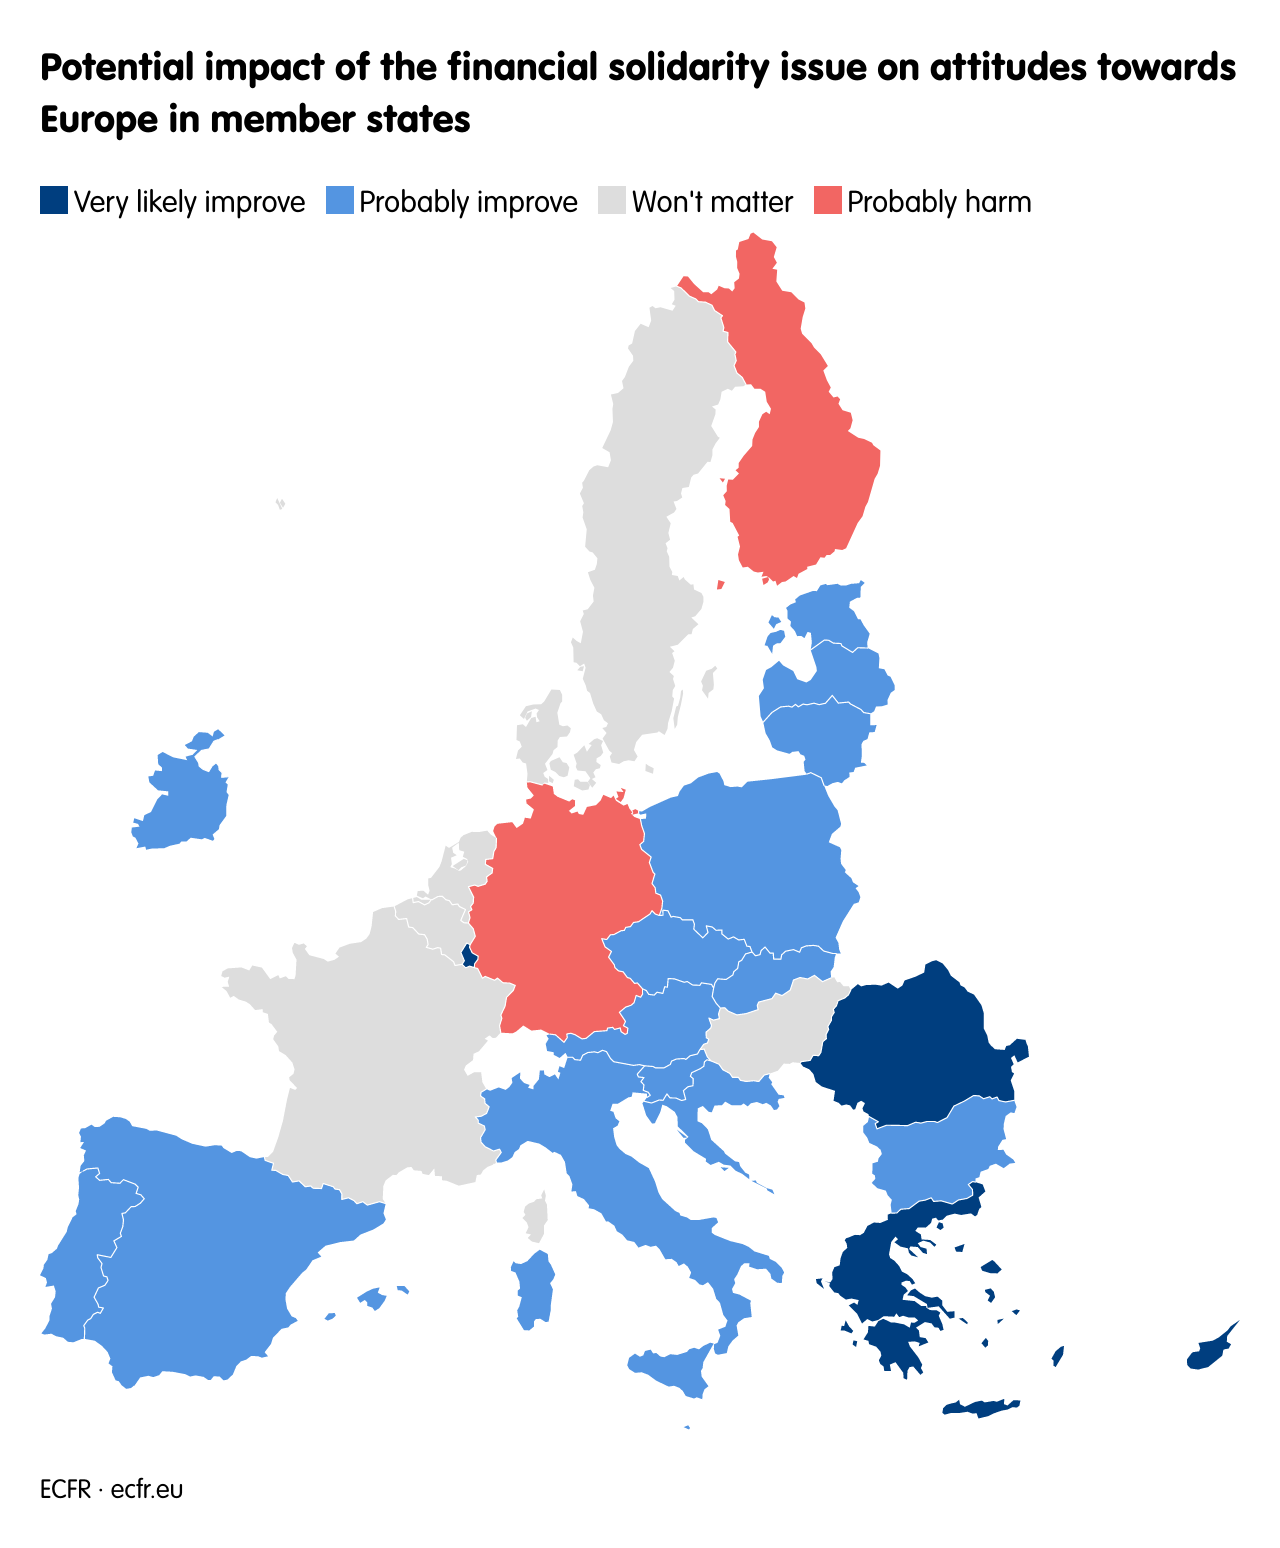 Potential impact of the financial solidarity issue on attitudes towards Europe in member states